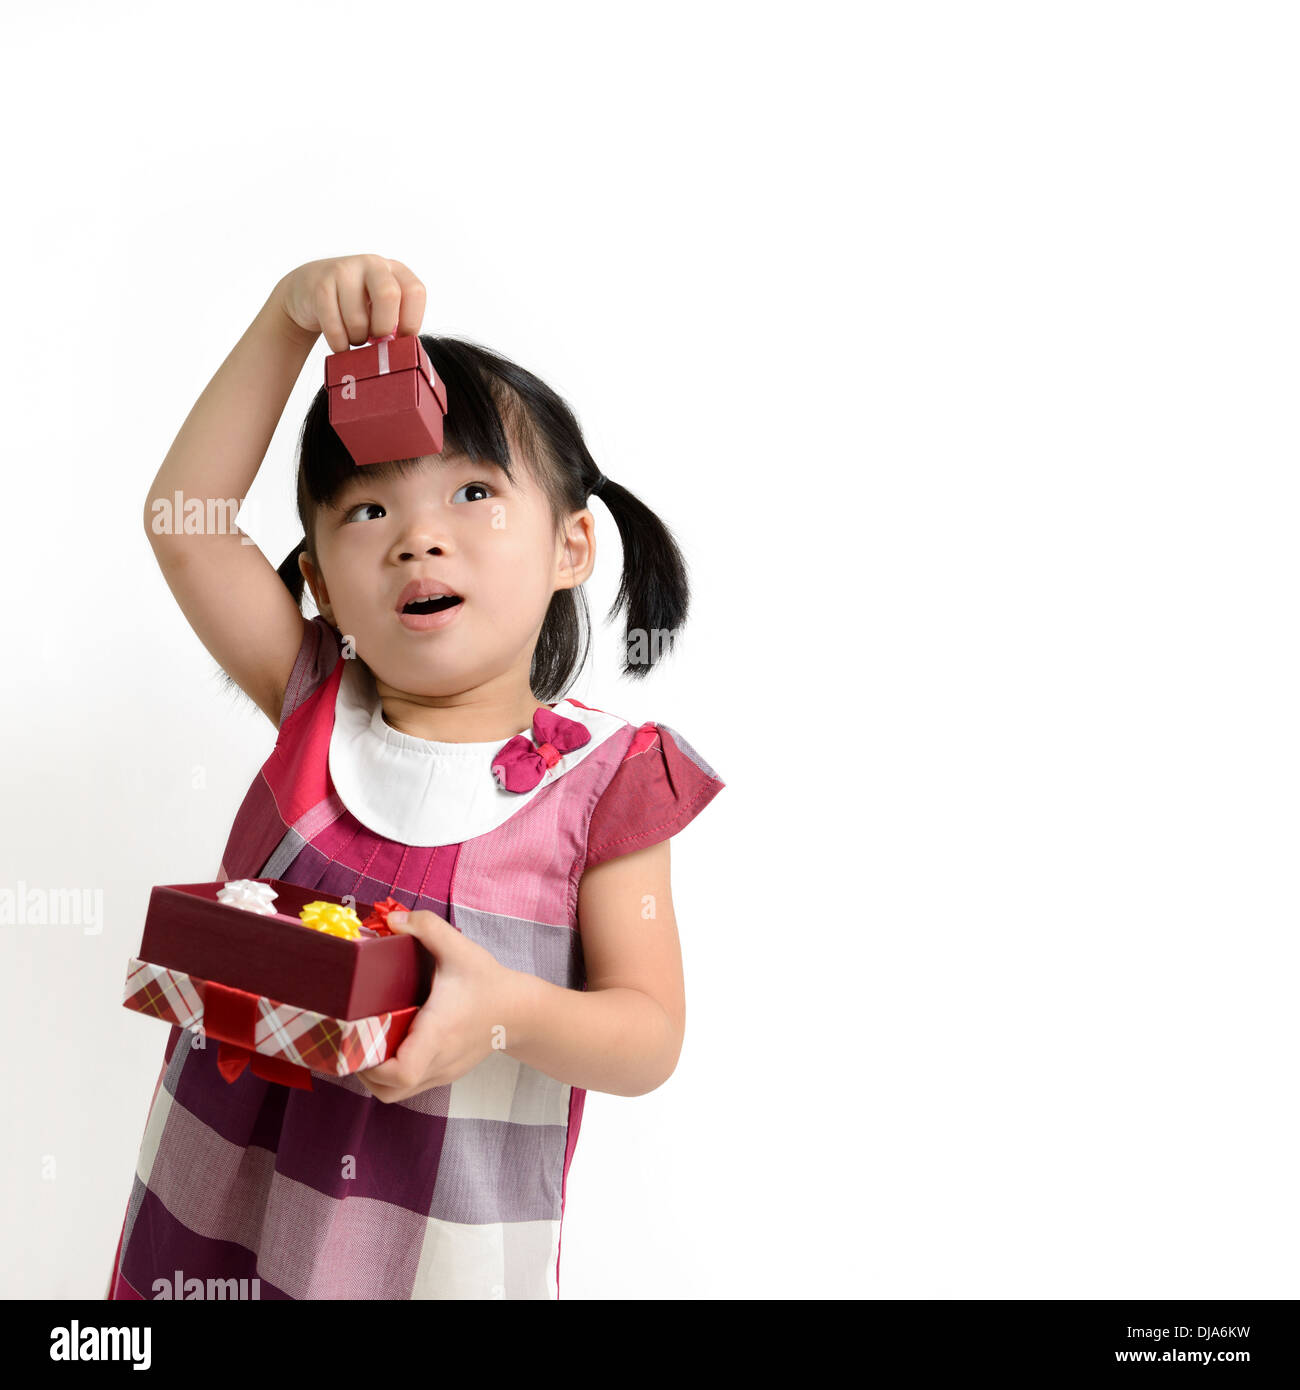 Portrait of little girl lifting up gift box Stock Photo